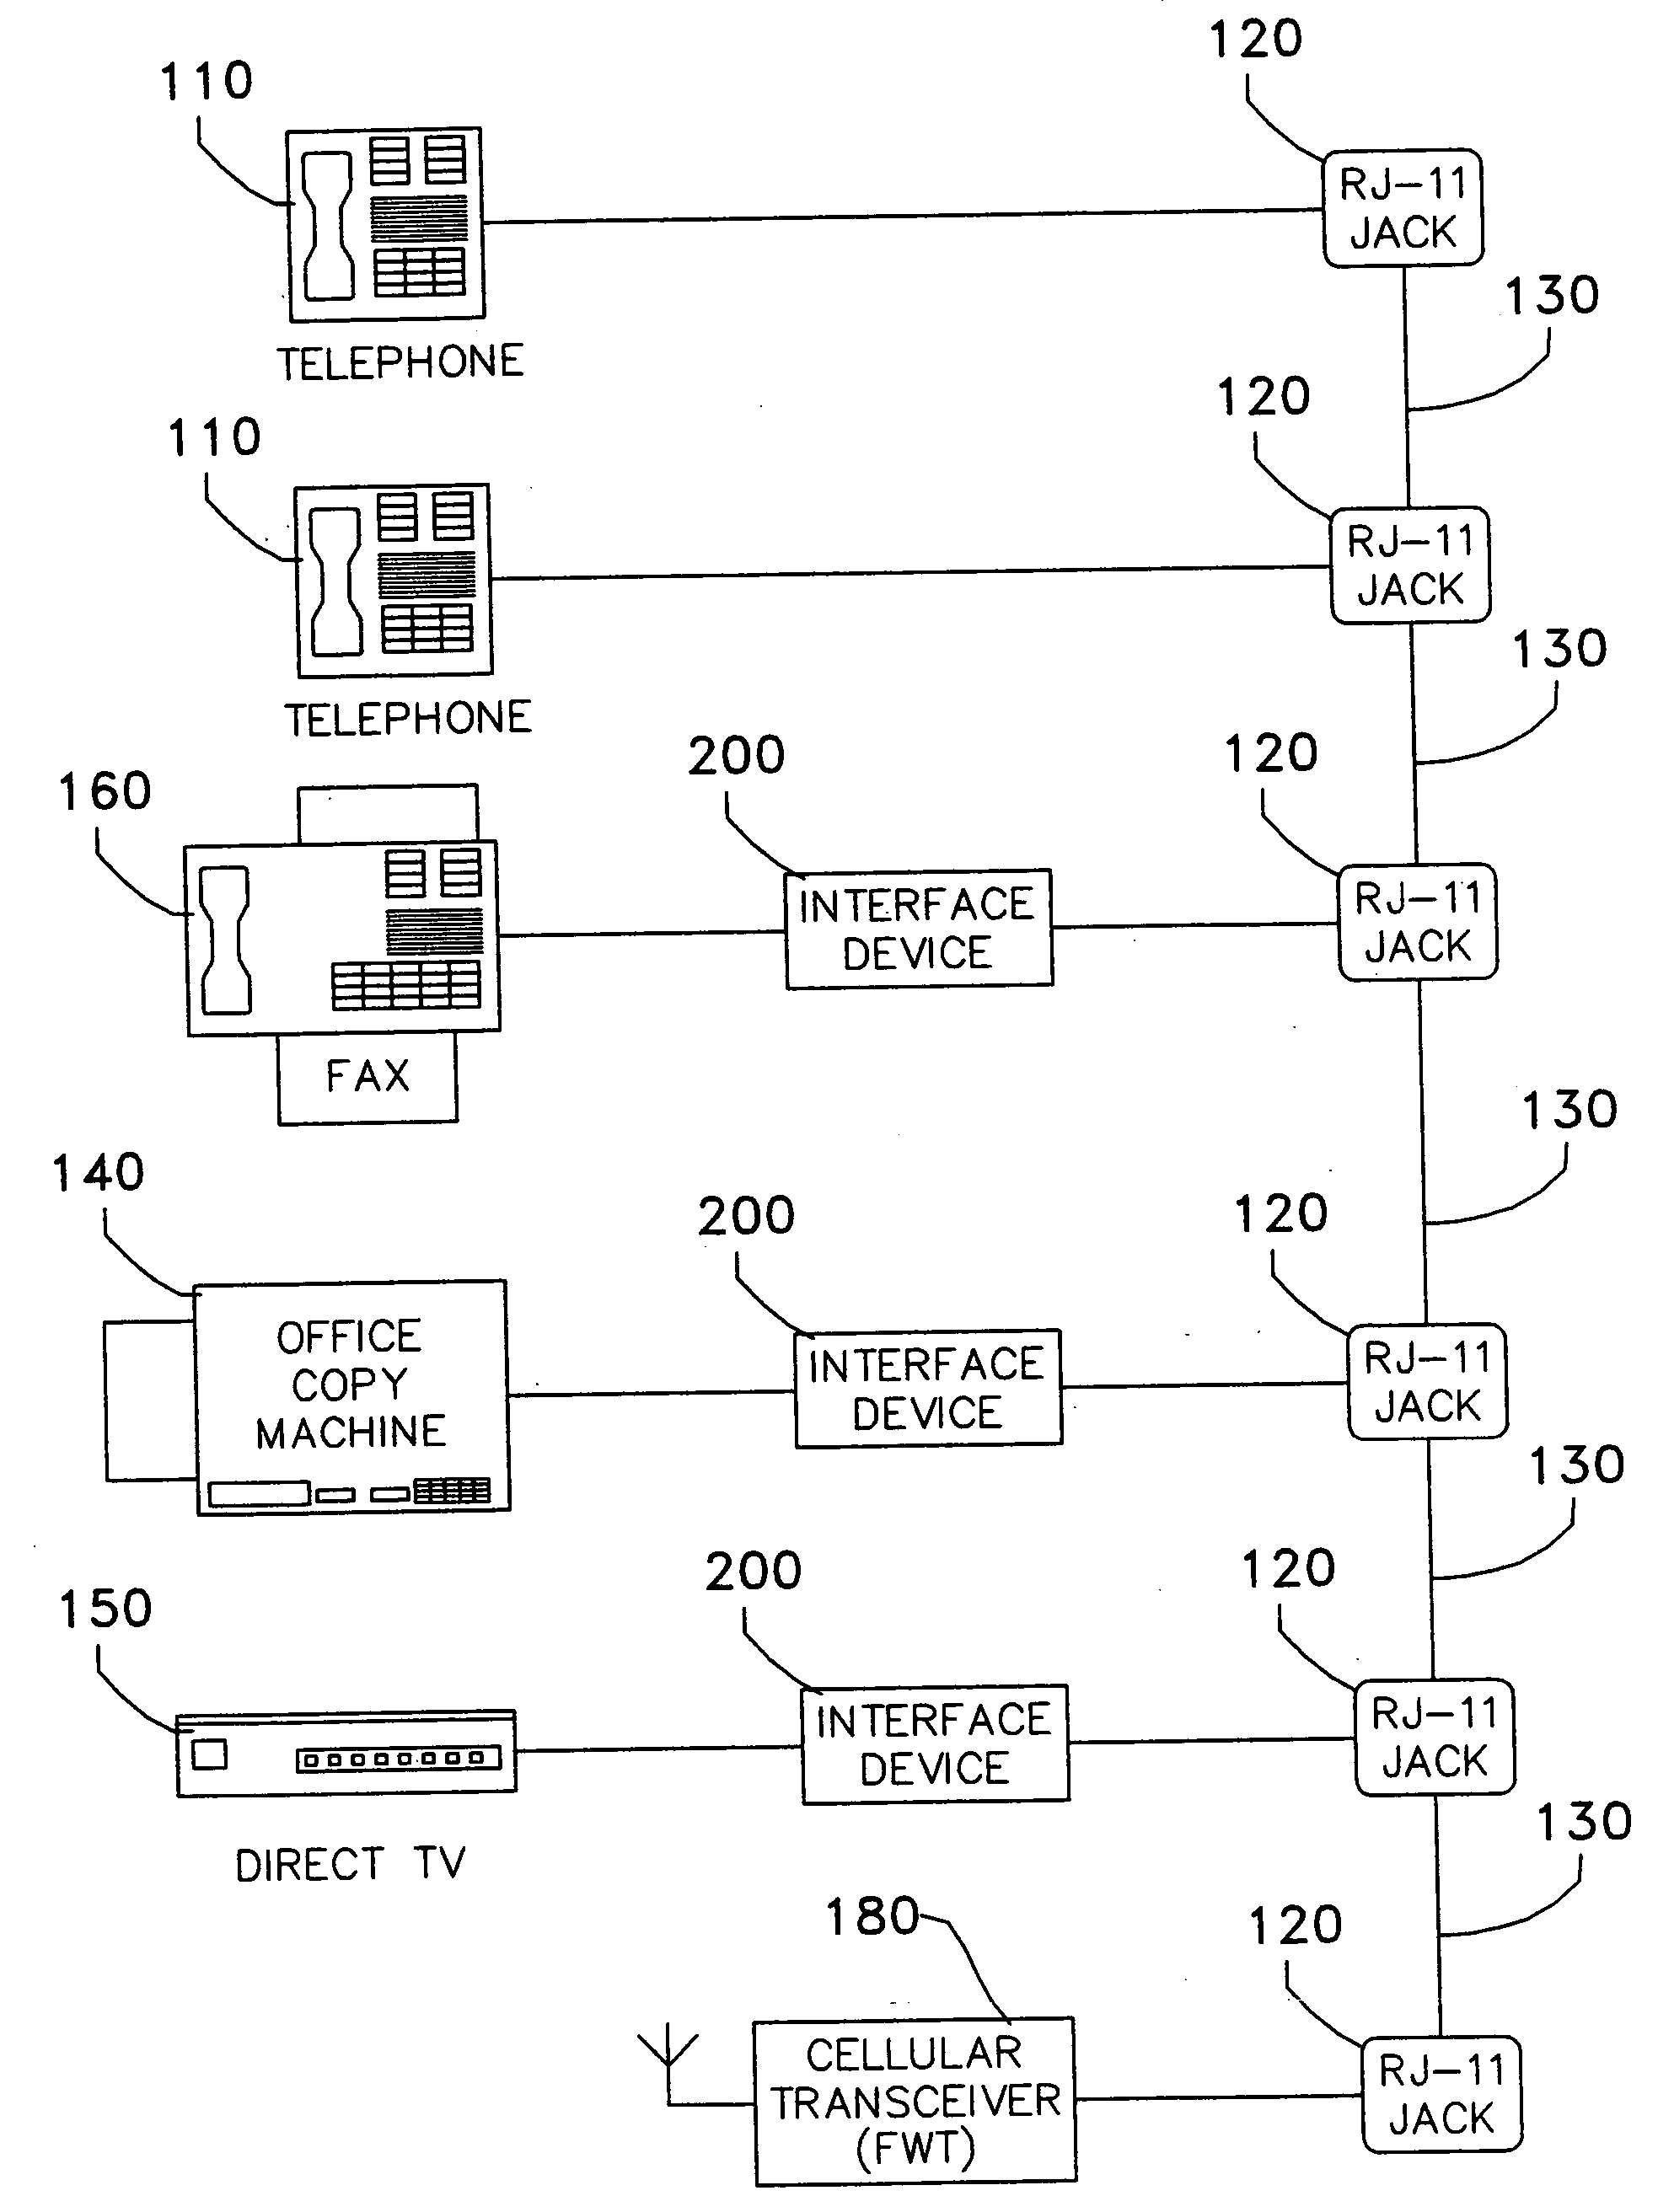 Method and apparatus for interfacing analog data devices to a cellular transceiver with analog modem capability